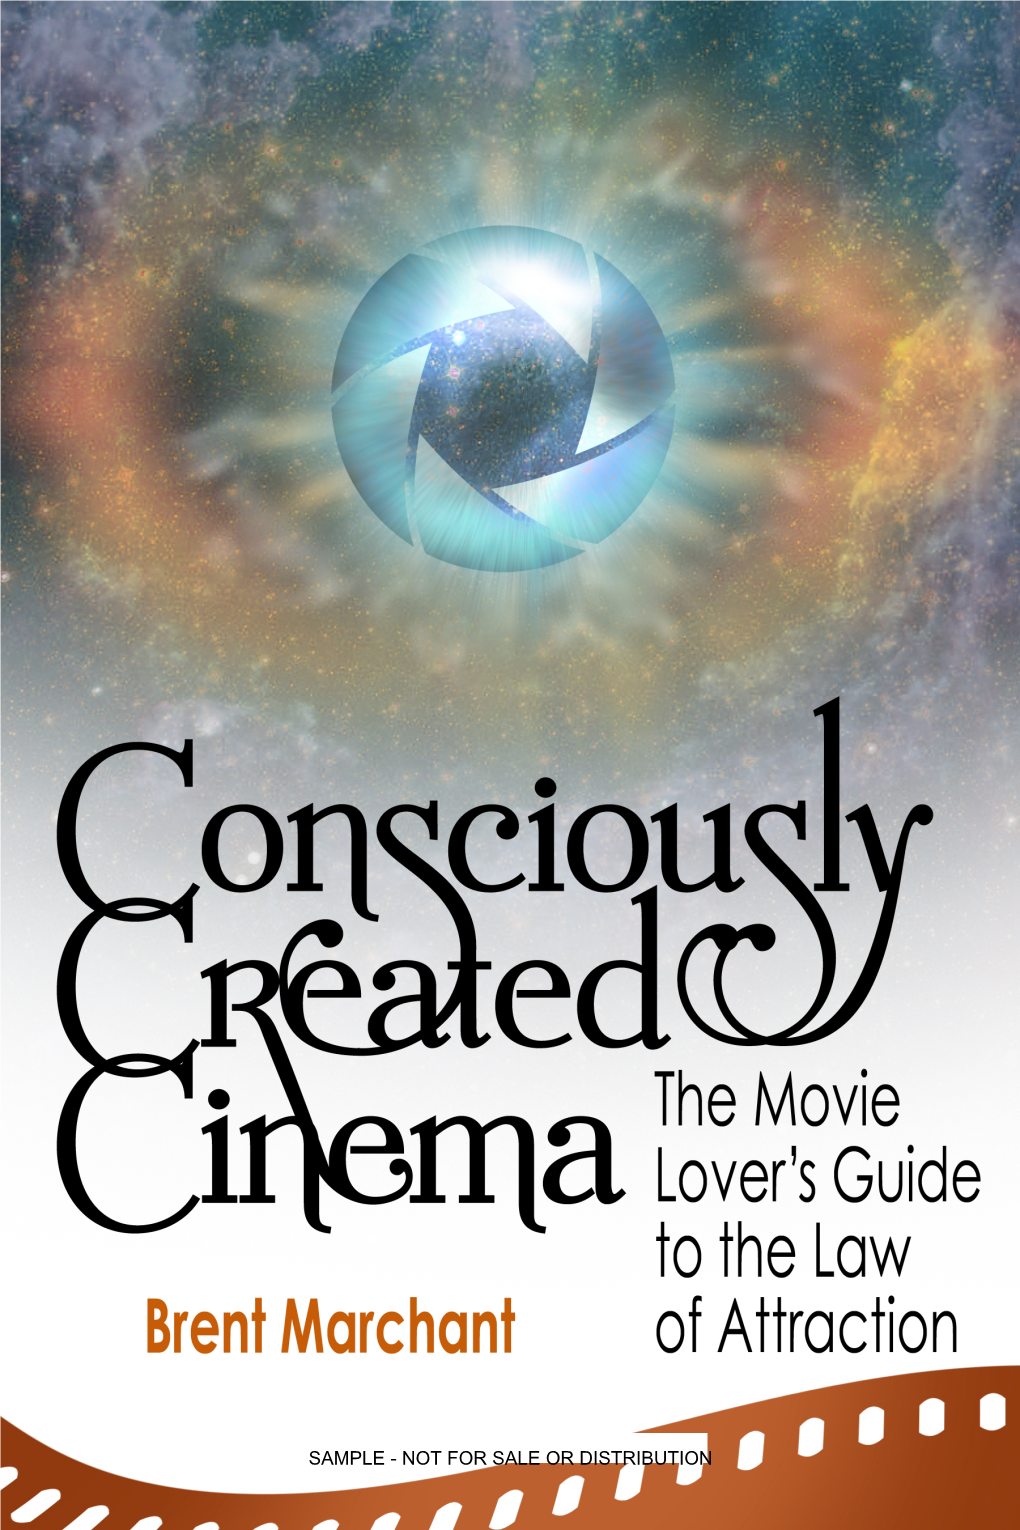 SAMPLE - NOT for SALE OR DISTRIBUTION Consciously Created Cinema